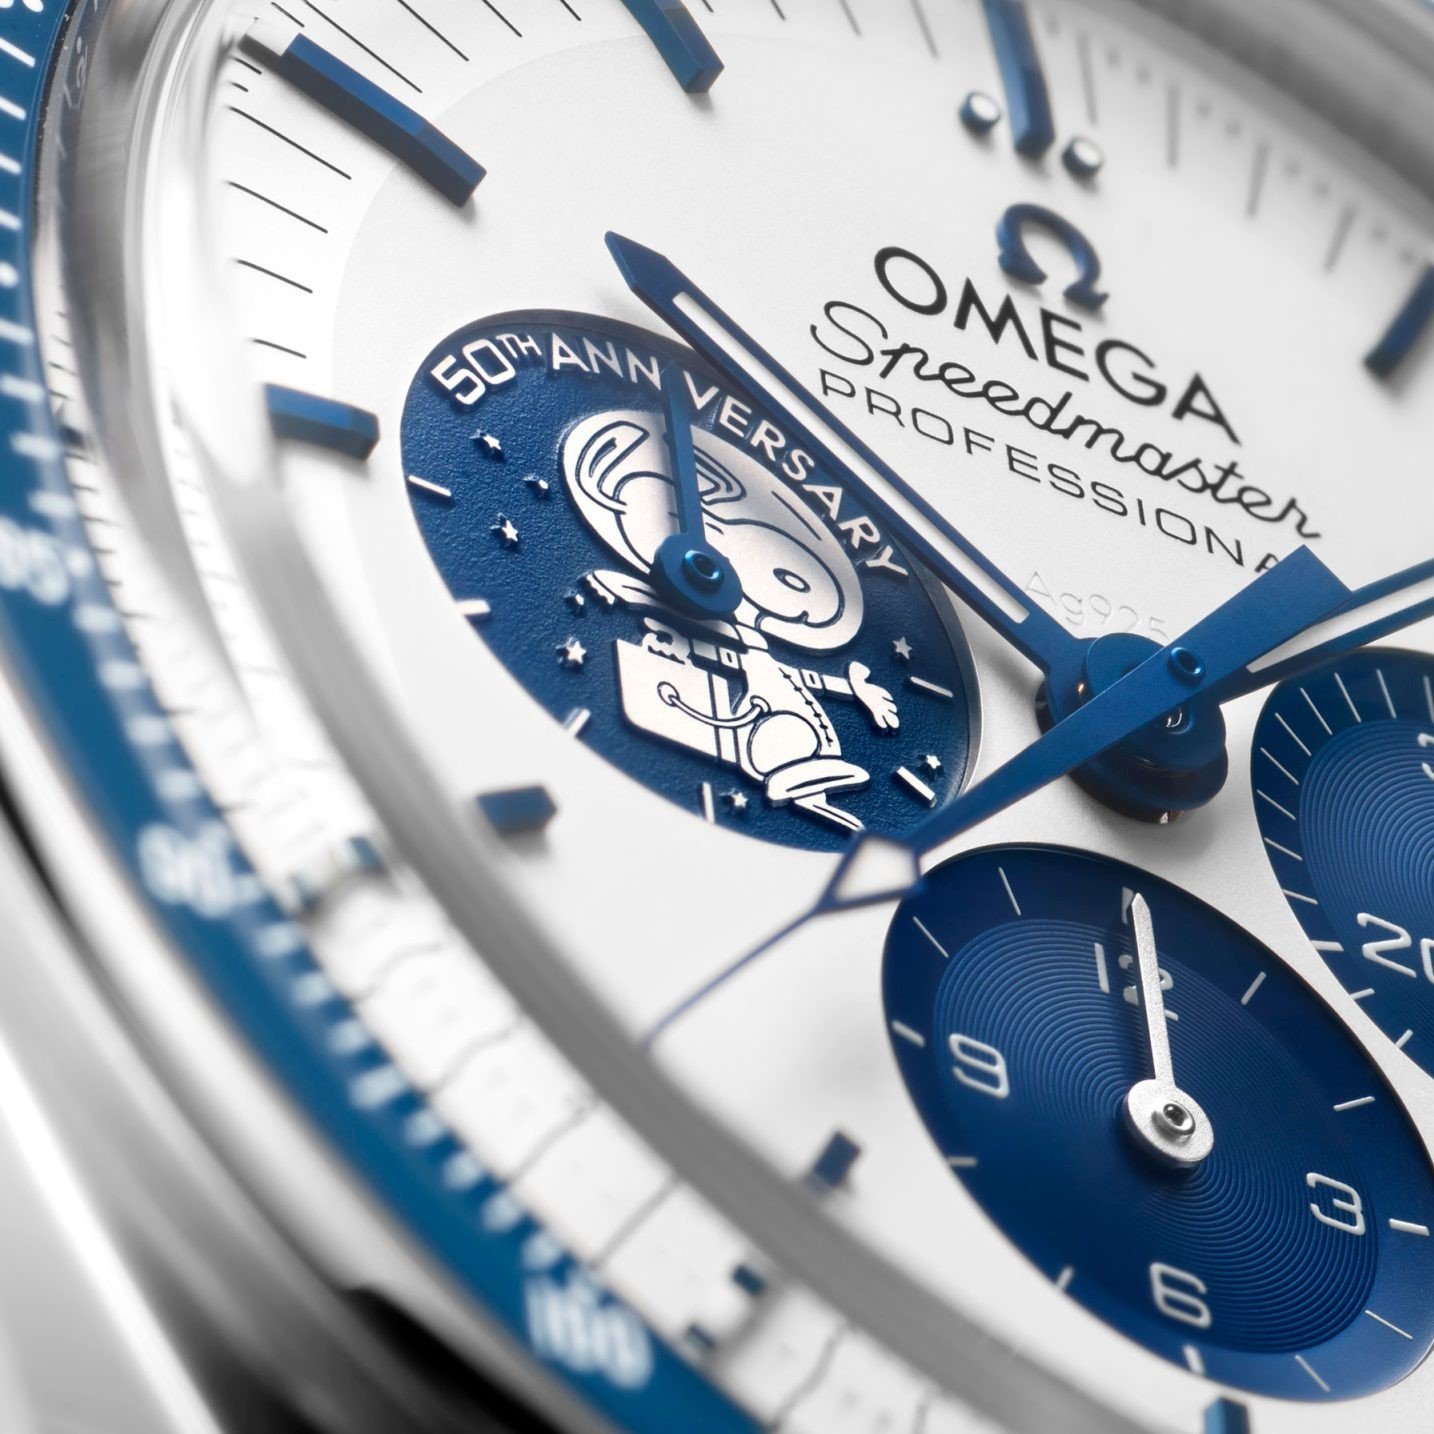 OMEGA celebrates 50 years of the “Silver Snoopy Award”